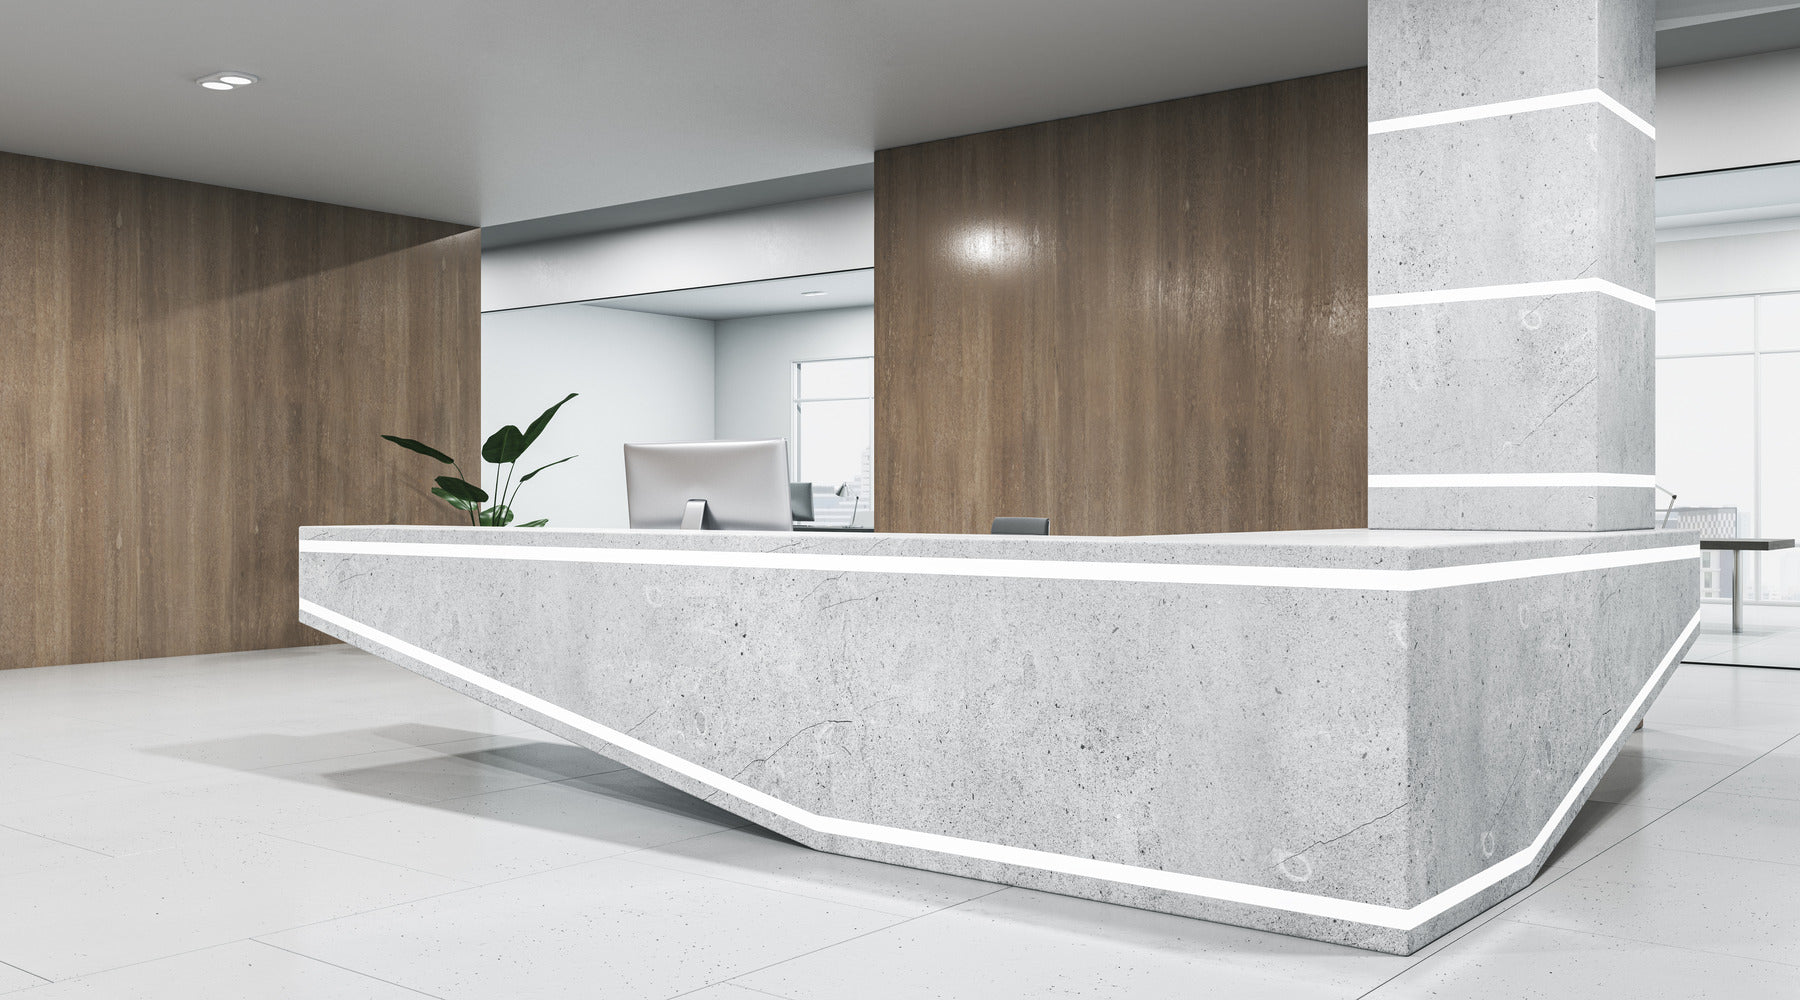 Clean concrete and wooden office interior with reception desk illuminated with recessed lighting